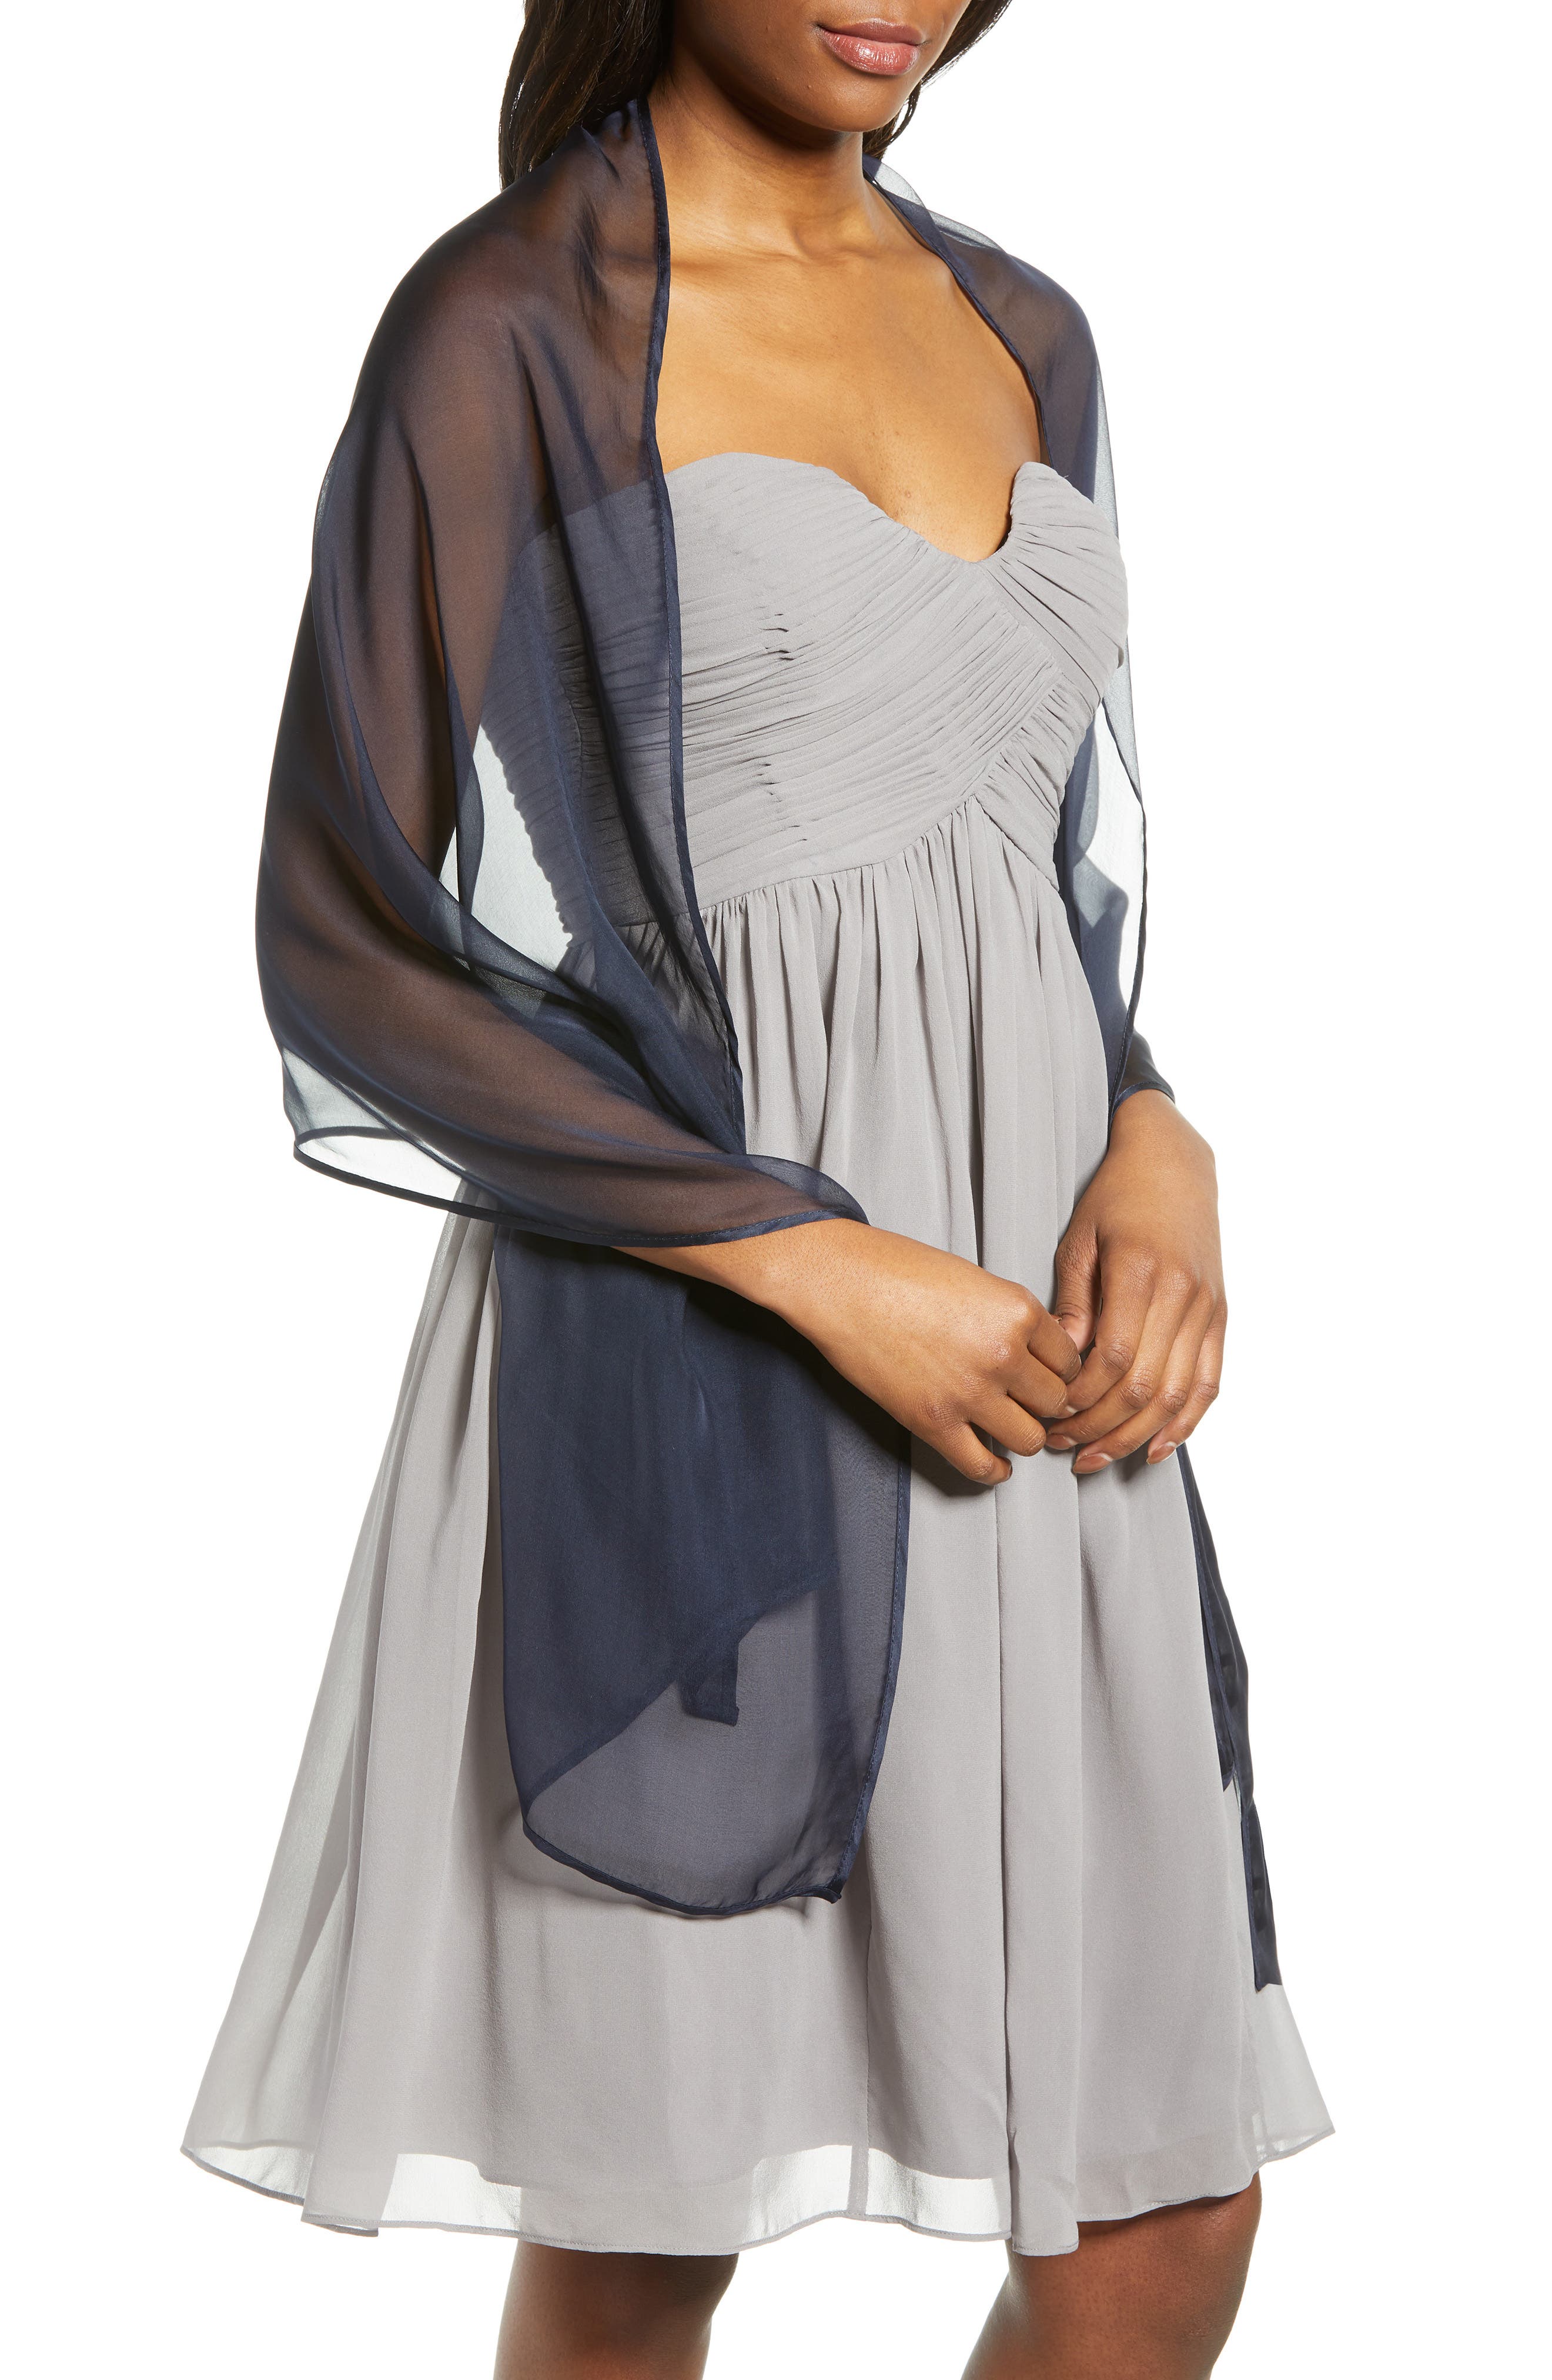 Sheer Wraps For Dresses Online Hotsell, UP TO 56% OFF |  www.editorialelpirata.com